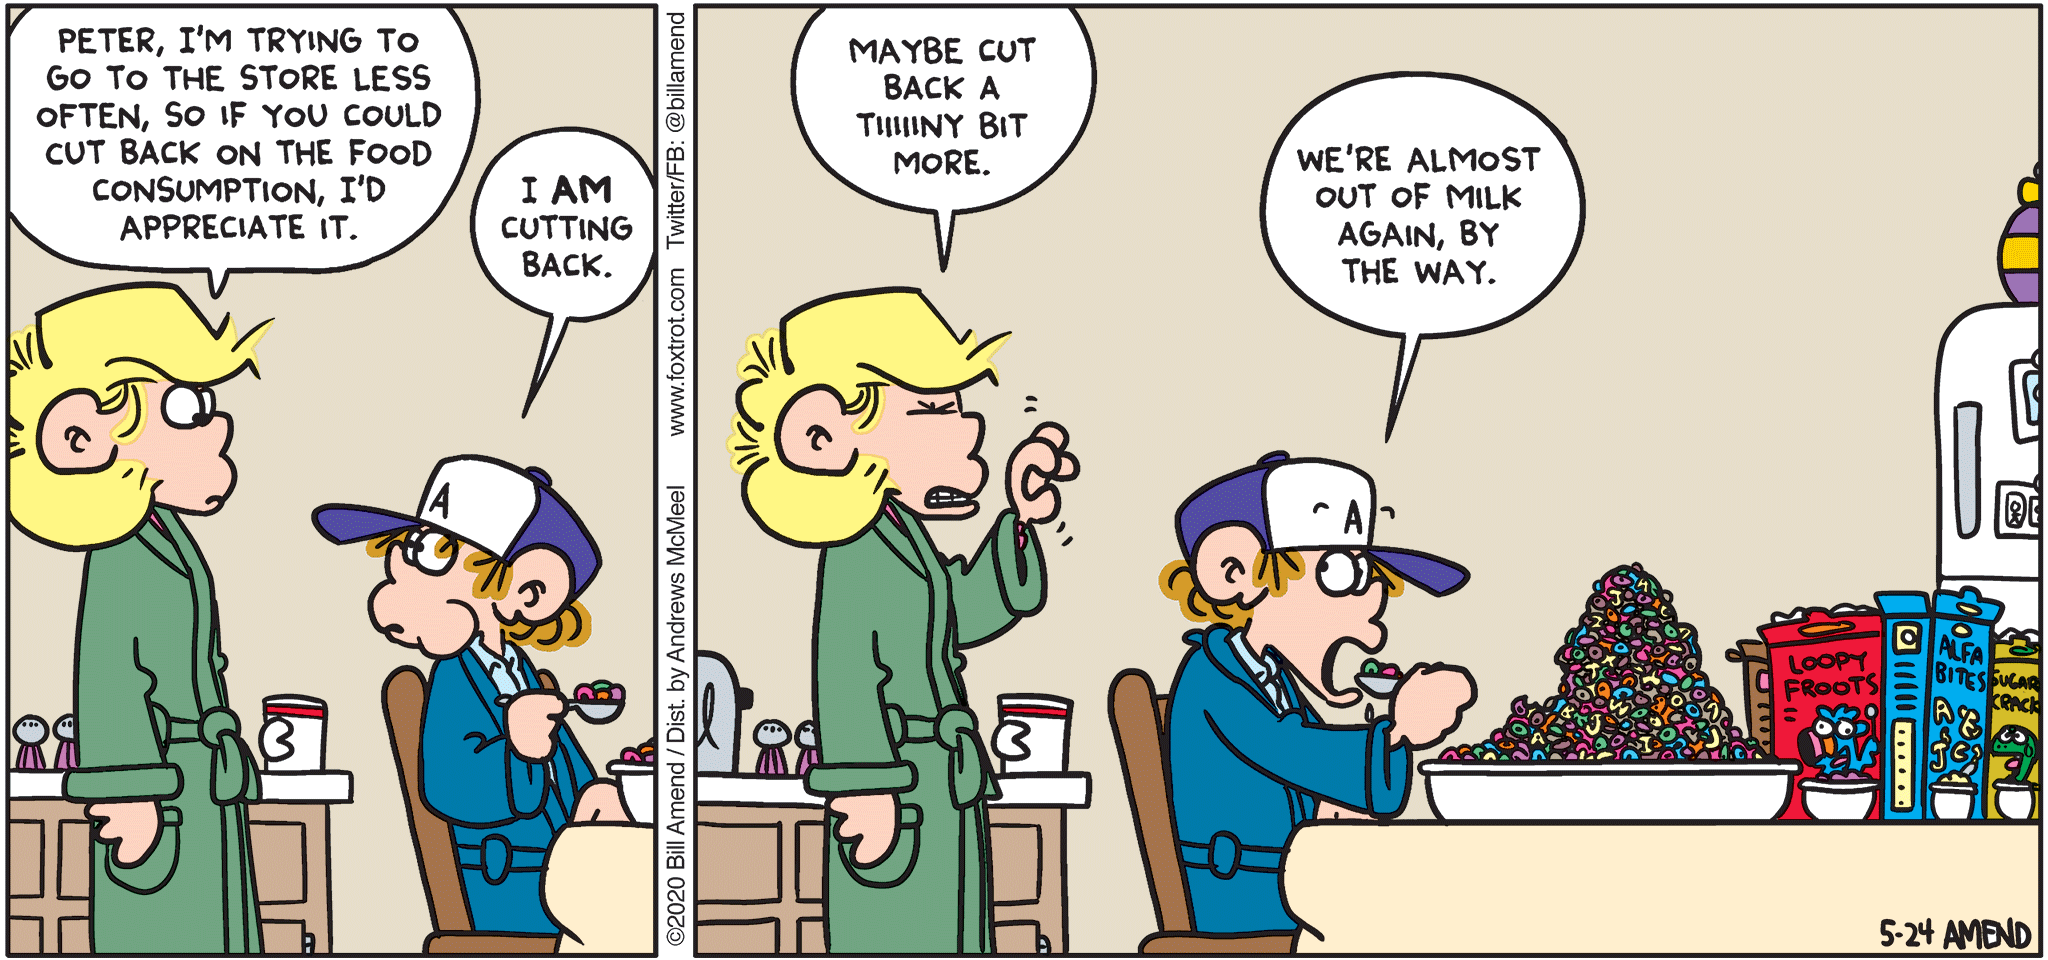 FoxTrot by Bill Amend - "Cereal Killer" published May 24, 2020 - Andy: Peter, I'm trying to go to the store less often, so if you could cut back on the food consumption, I'd appreciate it. Peter: I AM cutting back. Andy: Maybe cut back a tiiiiiiny bit more. Peter: We're almost out of milk again, by the way. 